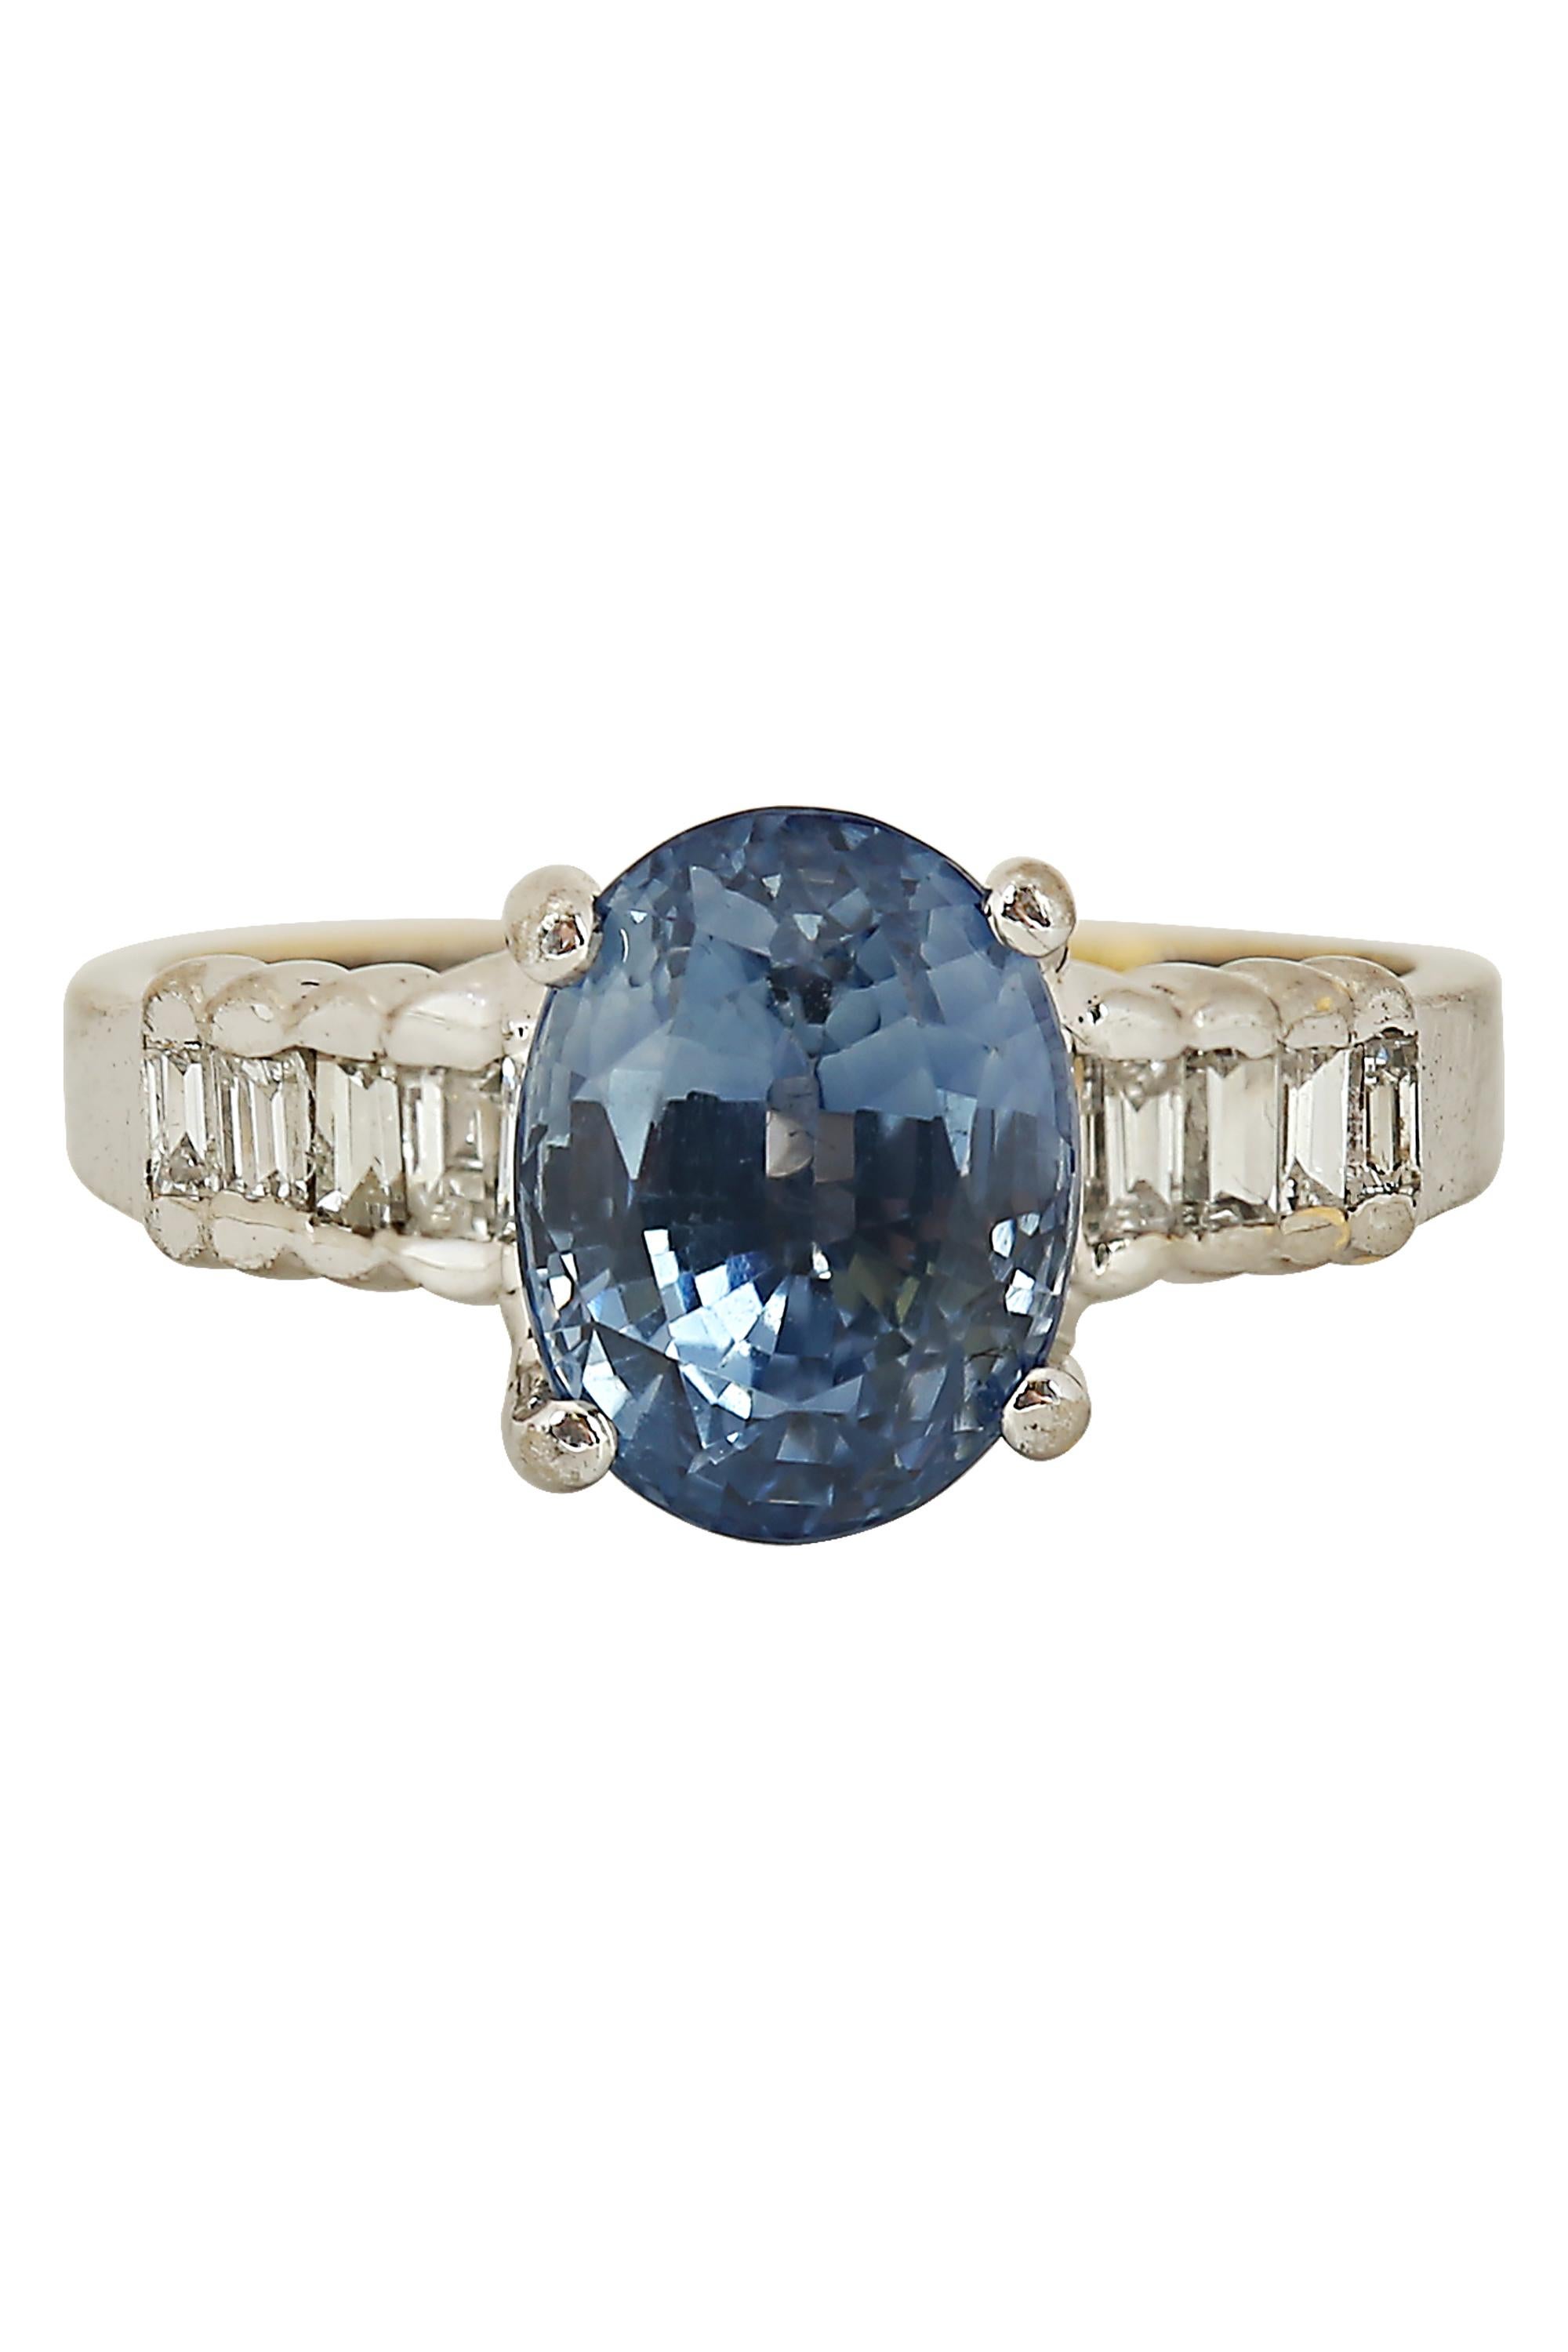 This ring features a delicately hued lavender fancy cut oval sapphire accentuated by shoulders of baguette cut diamonds in a 14 karat white gold mounting. The lavender sapphire weighs approximately 4 carats and is certified by GIA. Currently a size